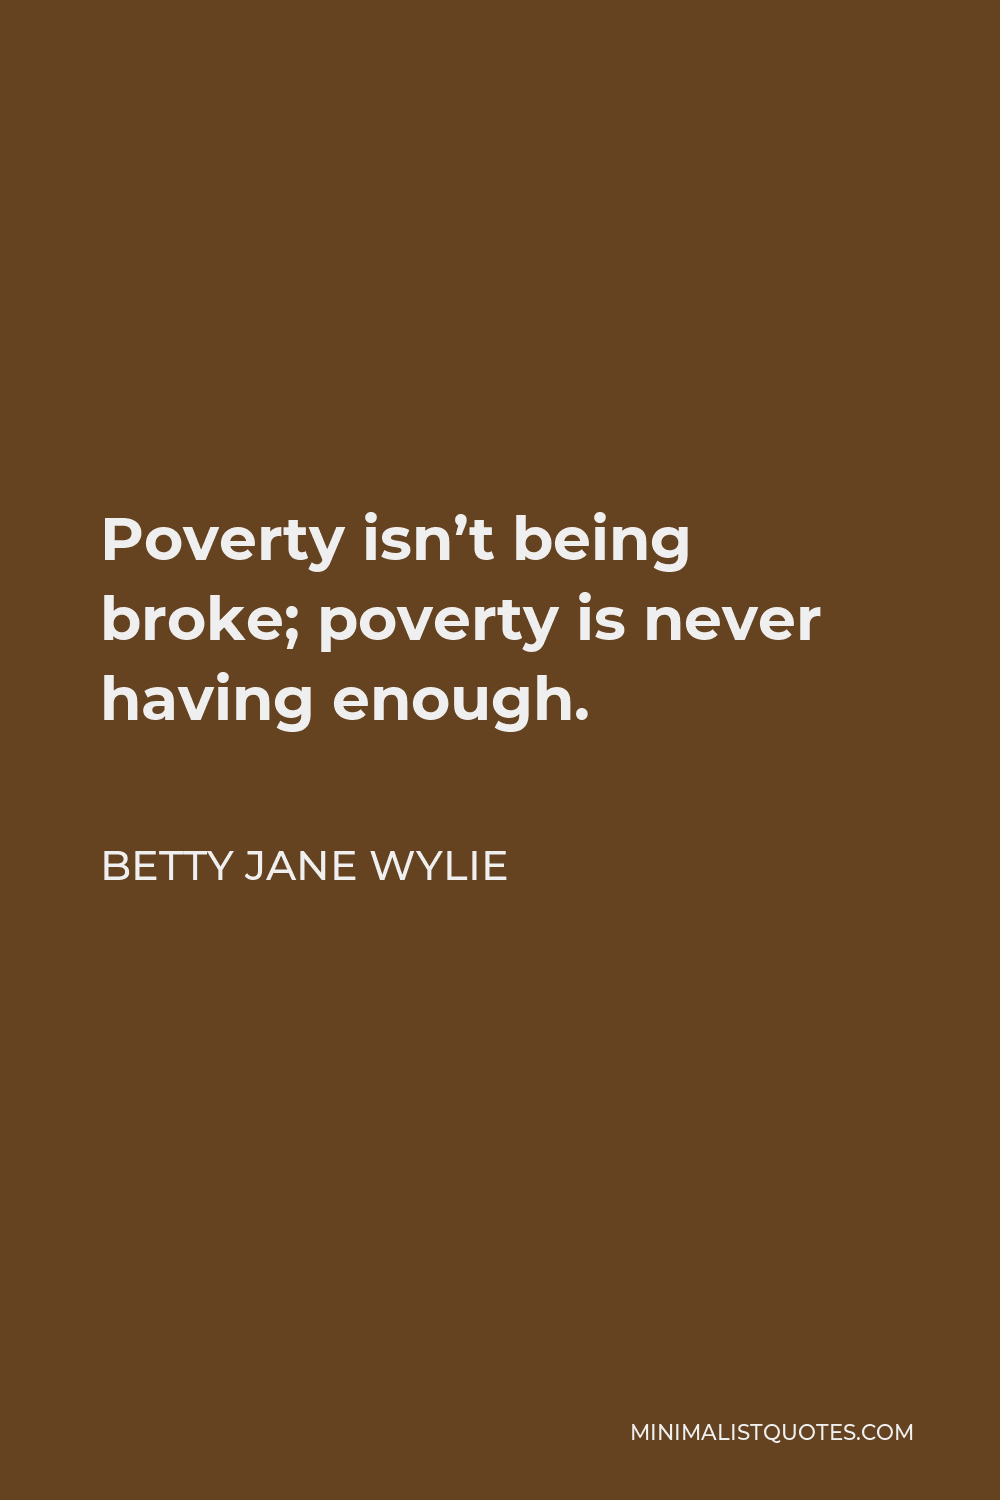 Betty Jane Wylie Quote - Poverty isn’t being broke; poverty is never having enough.